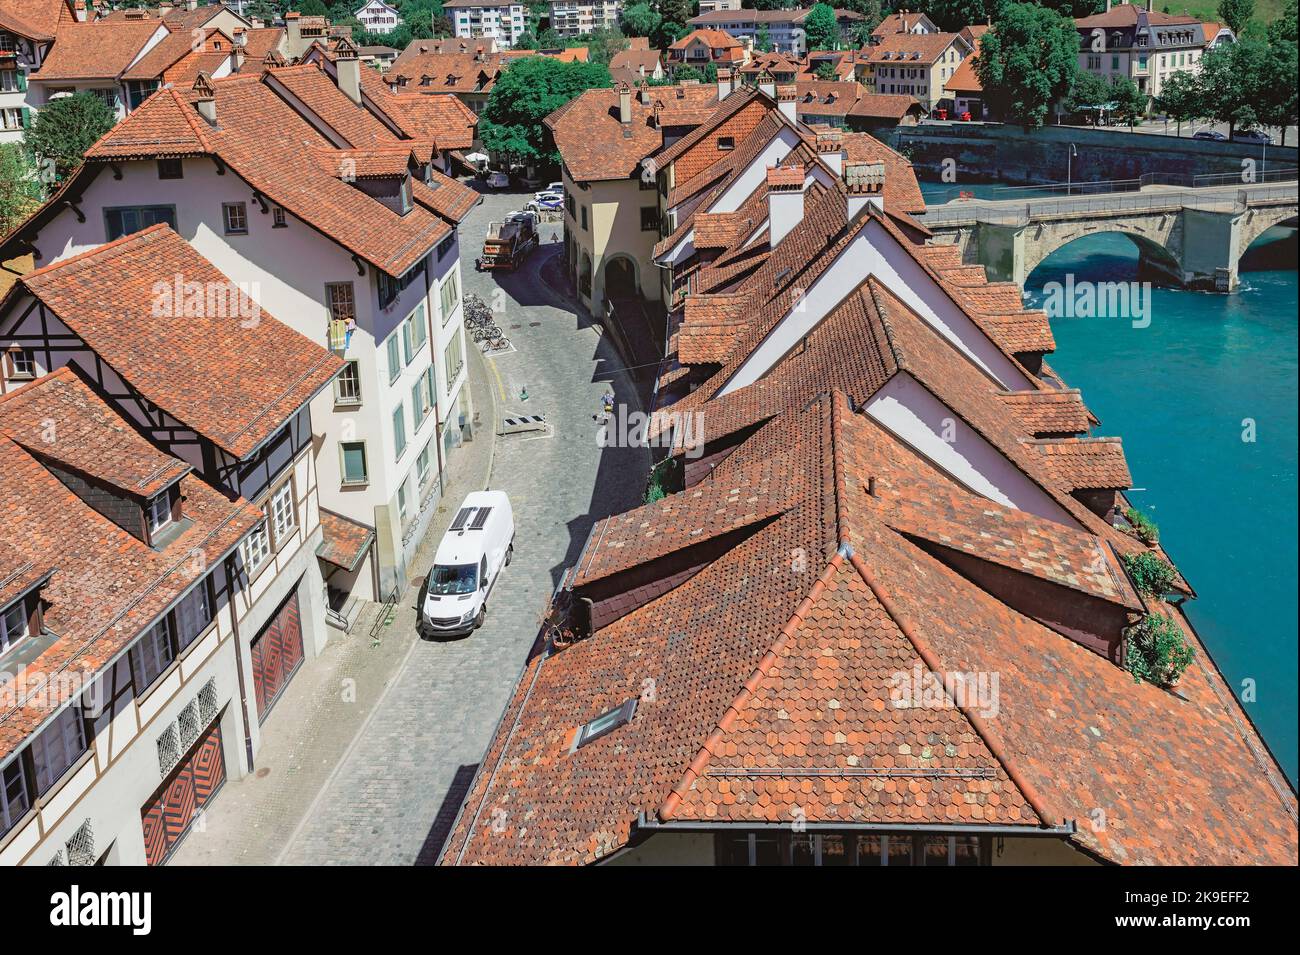 Bern city Switzerland aerial view of the old city rooftops summer day Stock Photo